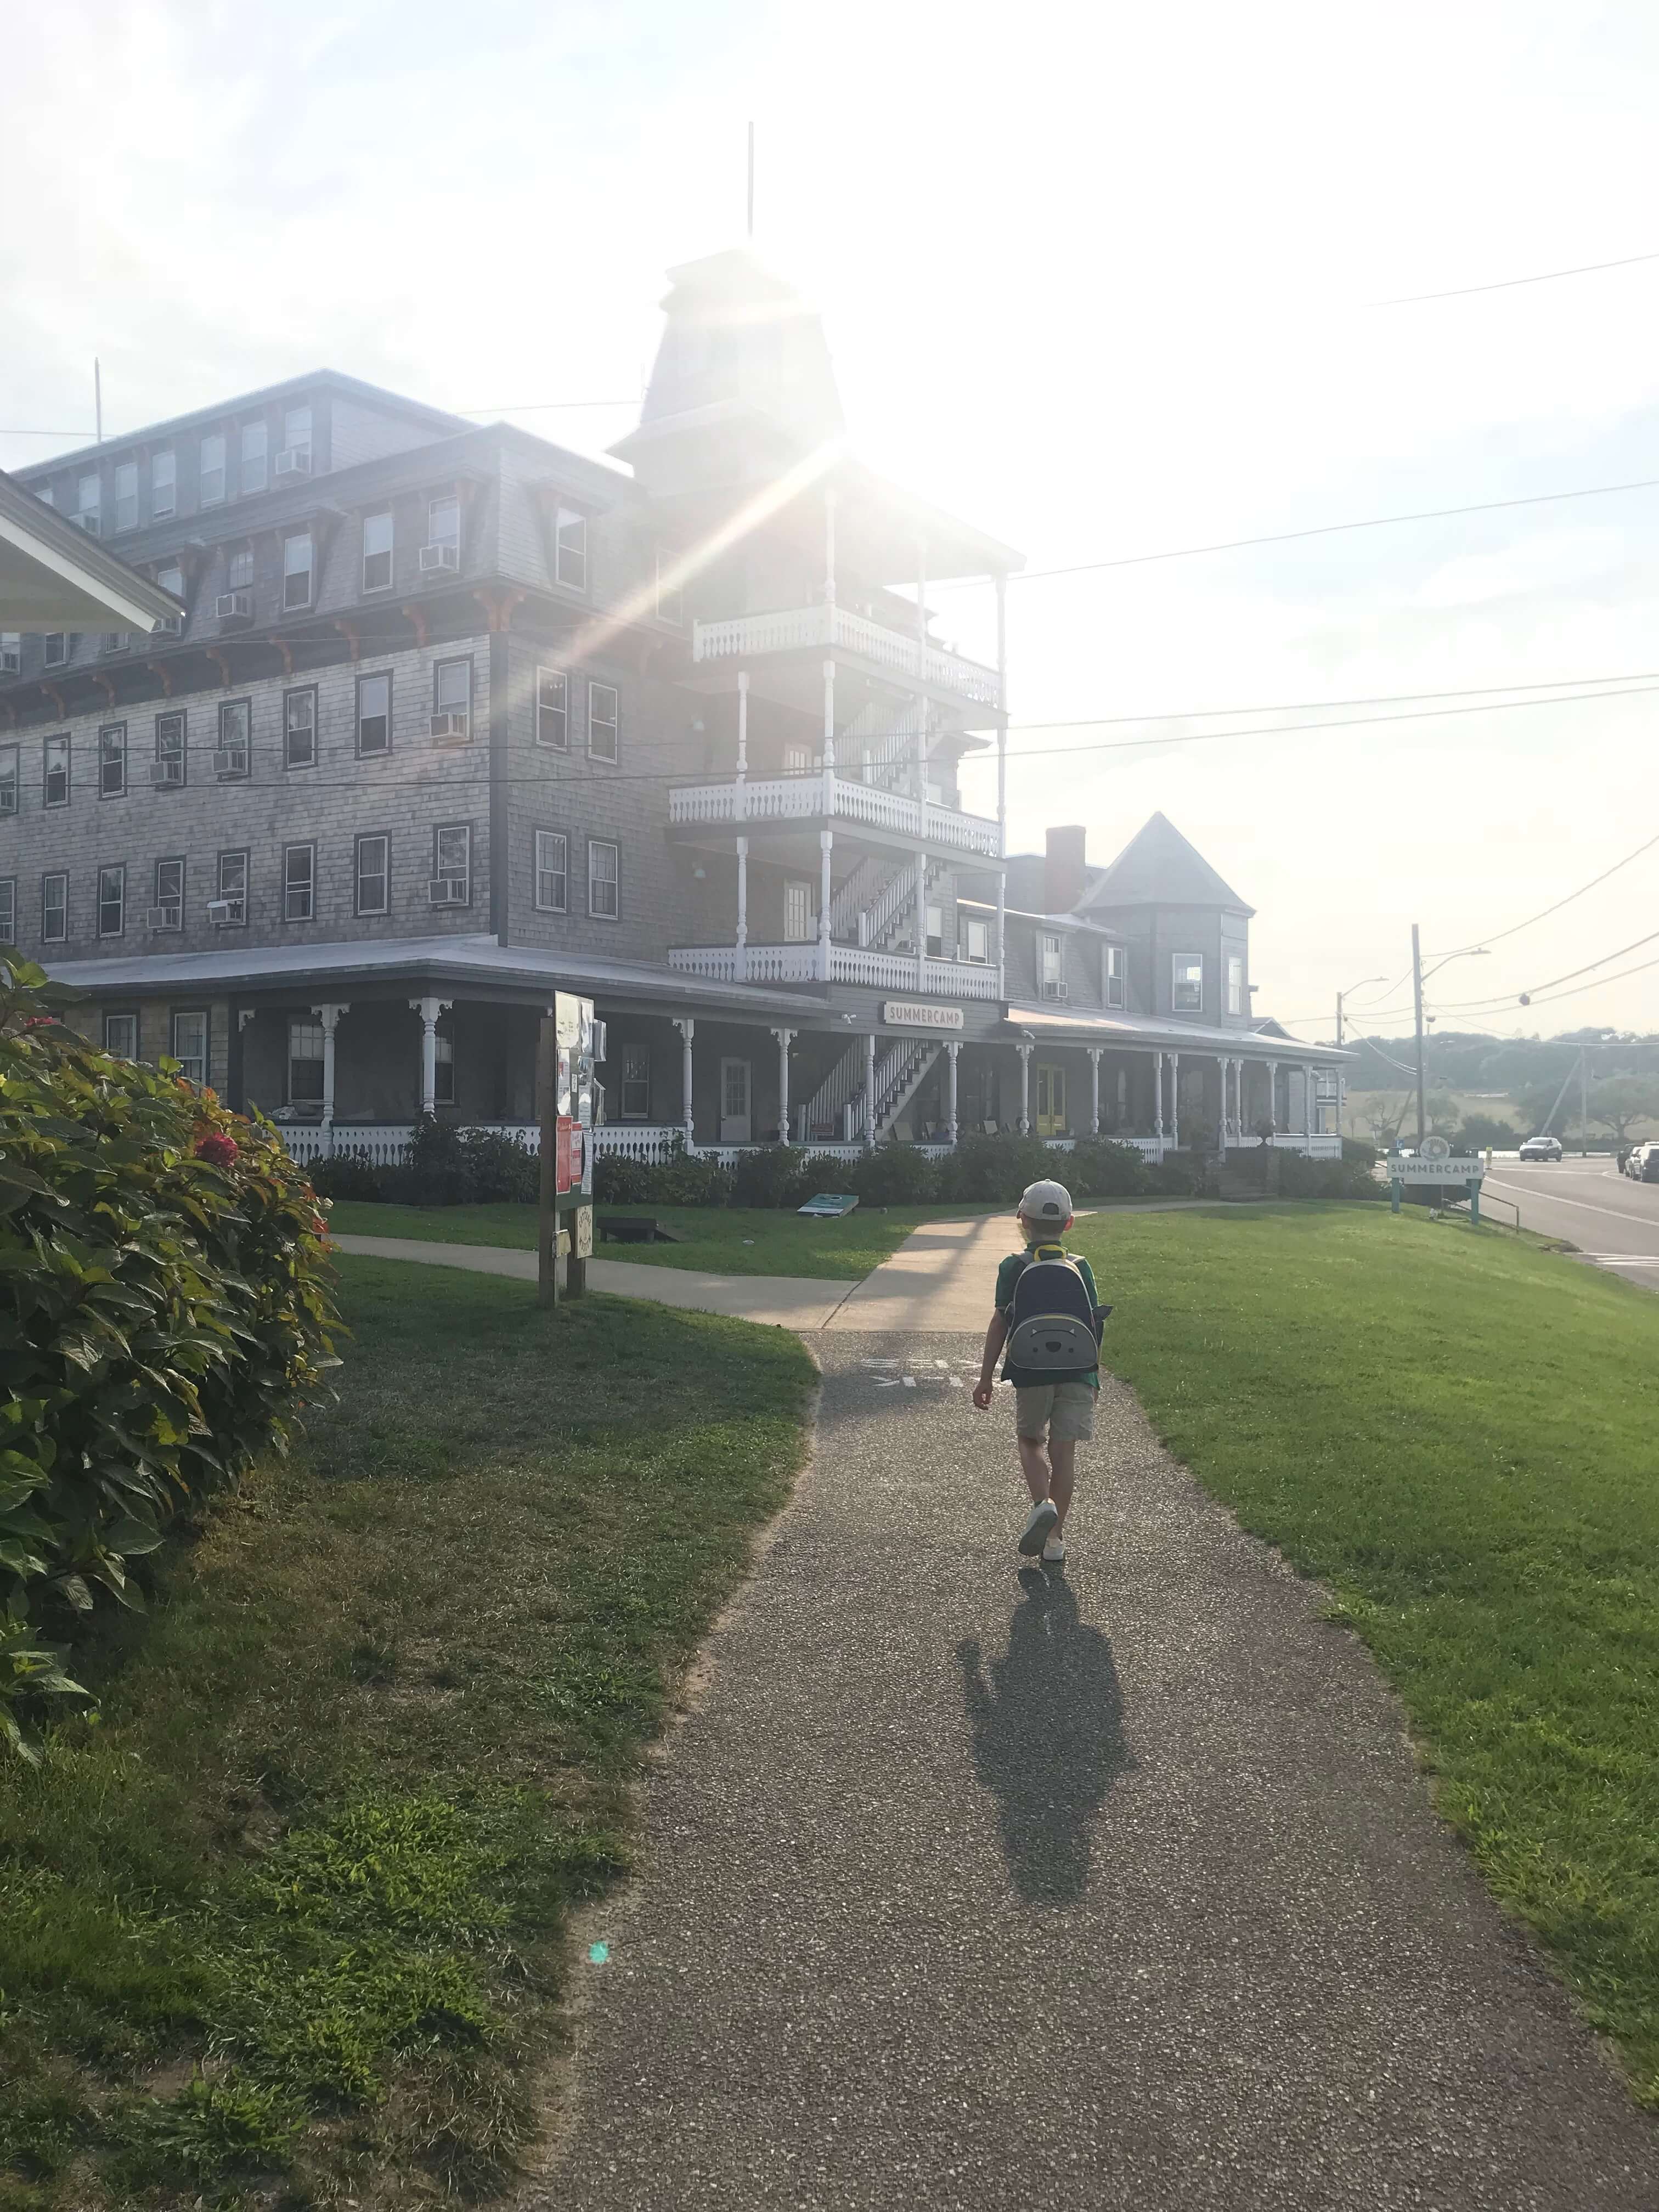 Review of our Stay at Summercamp Hotel in Martha's Vineyard